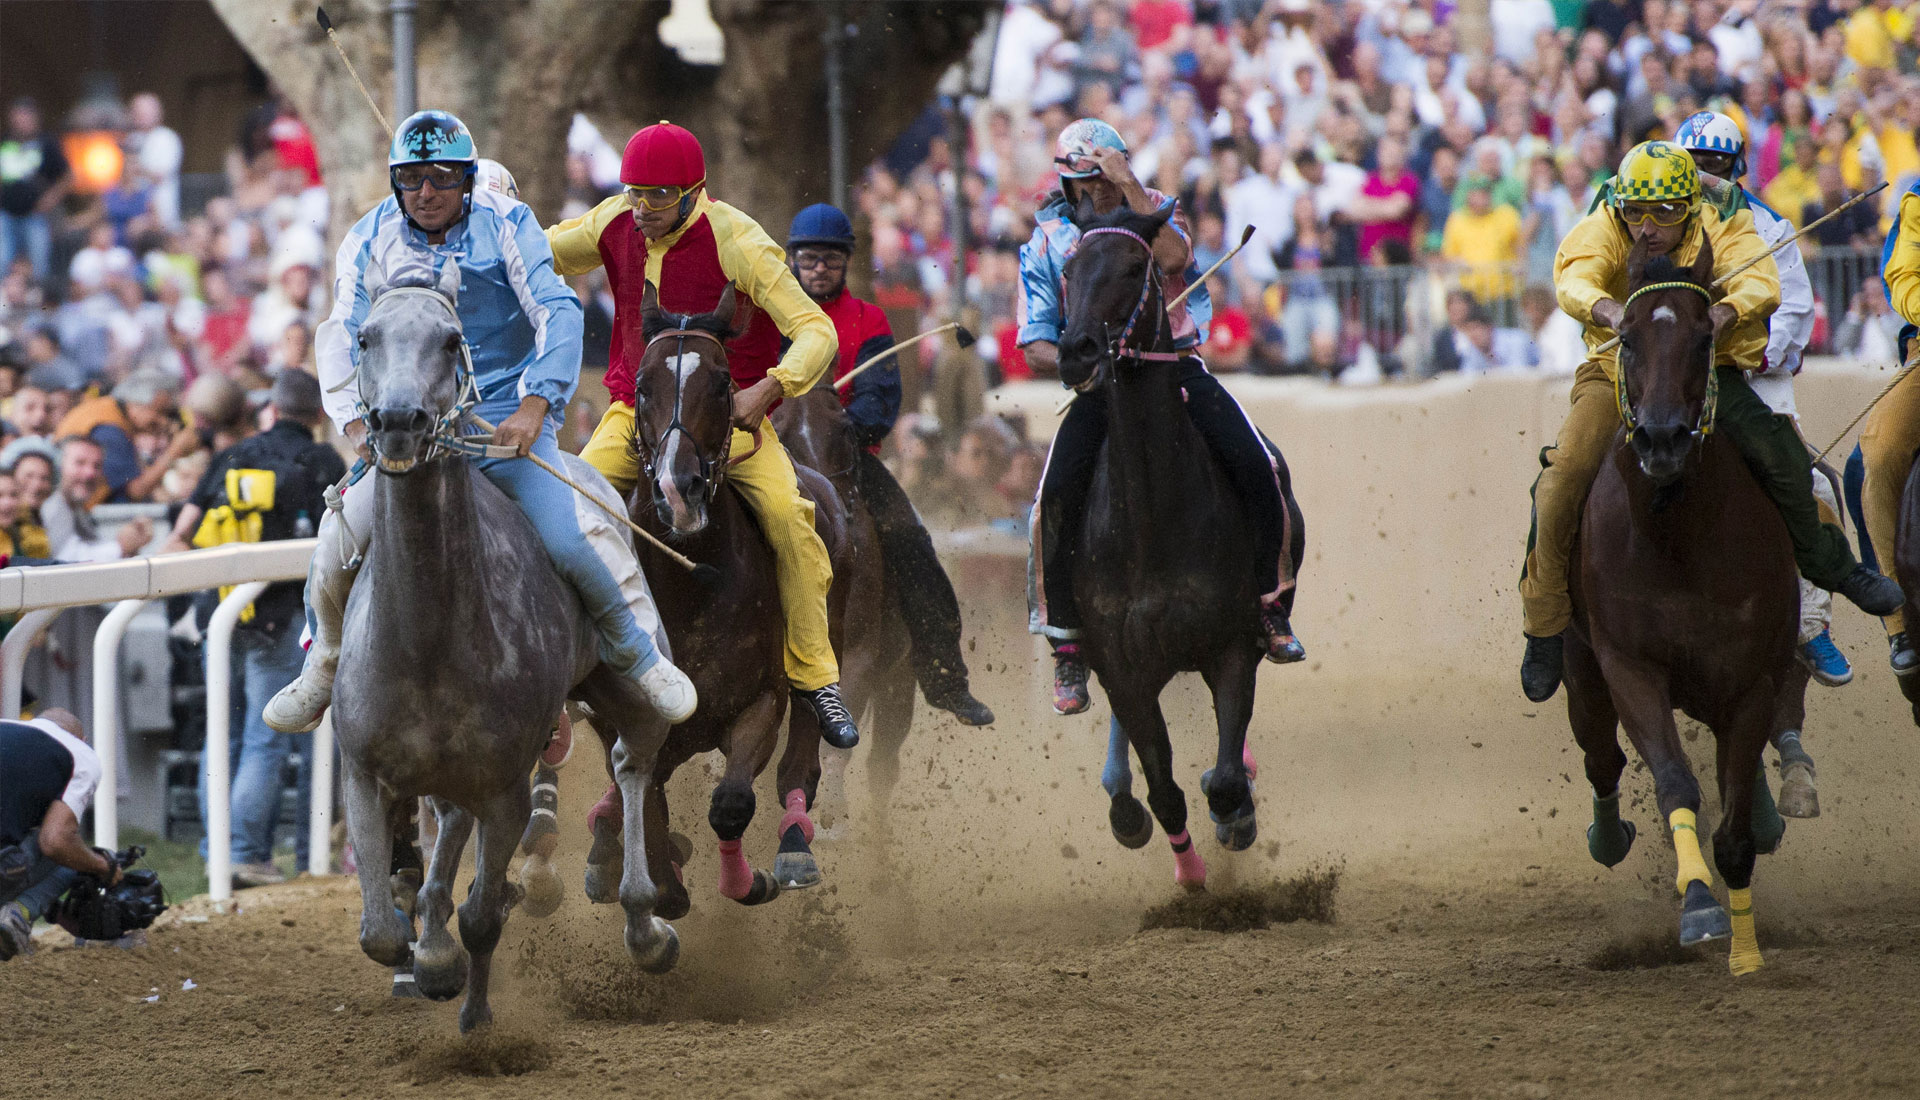 The Asti Palio: A tradition for over nine centuries